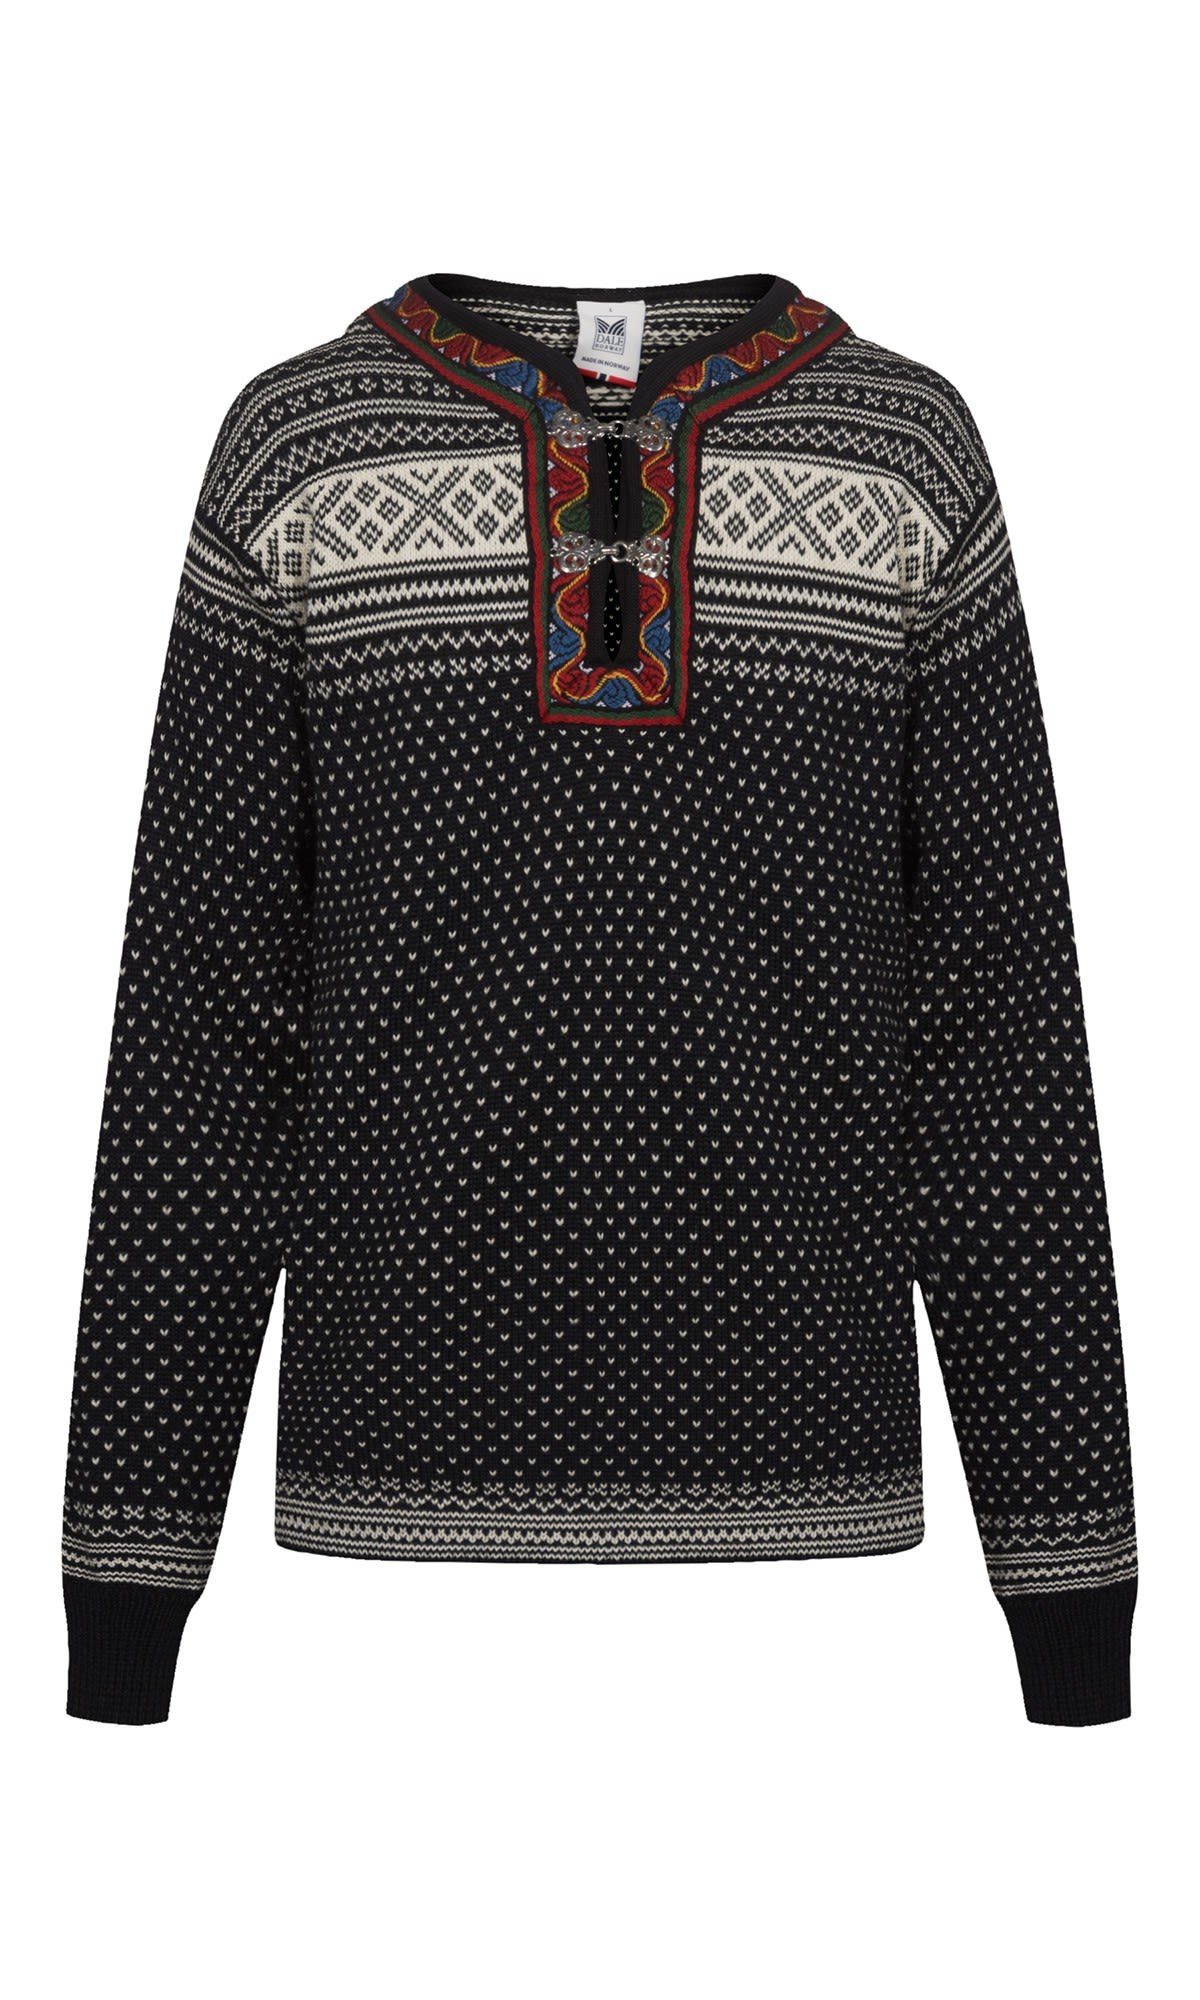 Norway Sweater Dale Longpullover Offwhite Setesdal Of Black Freizeitpullover of Norway Dale -